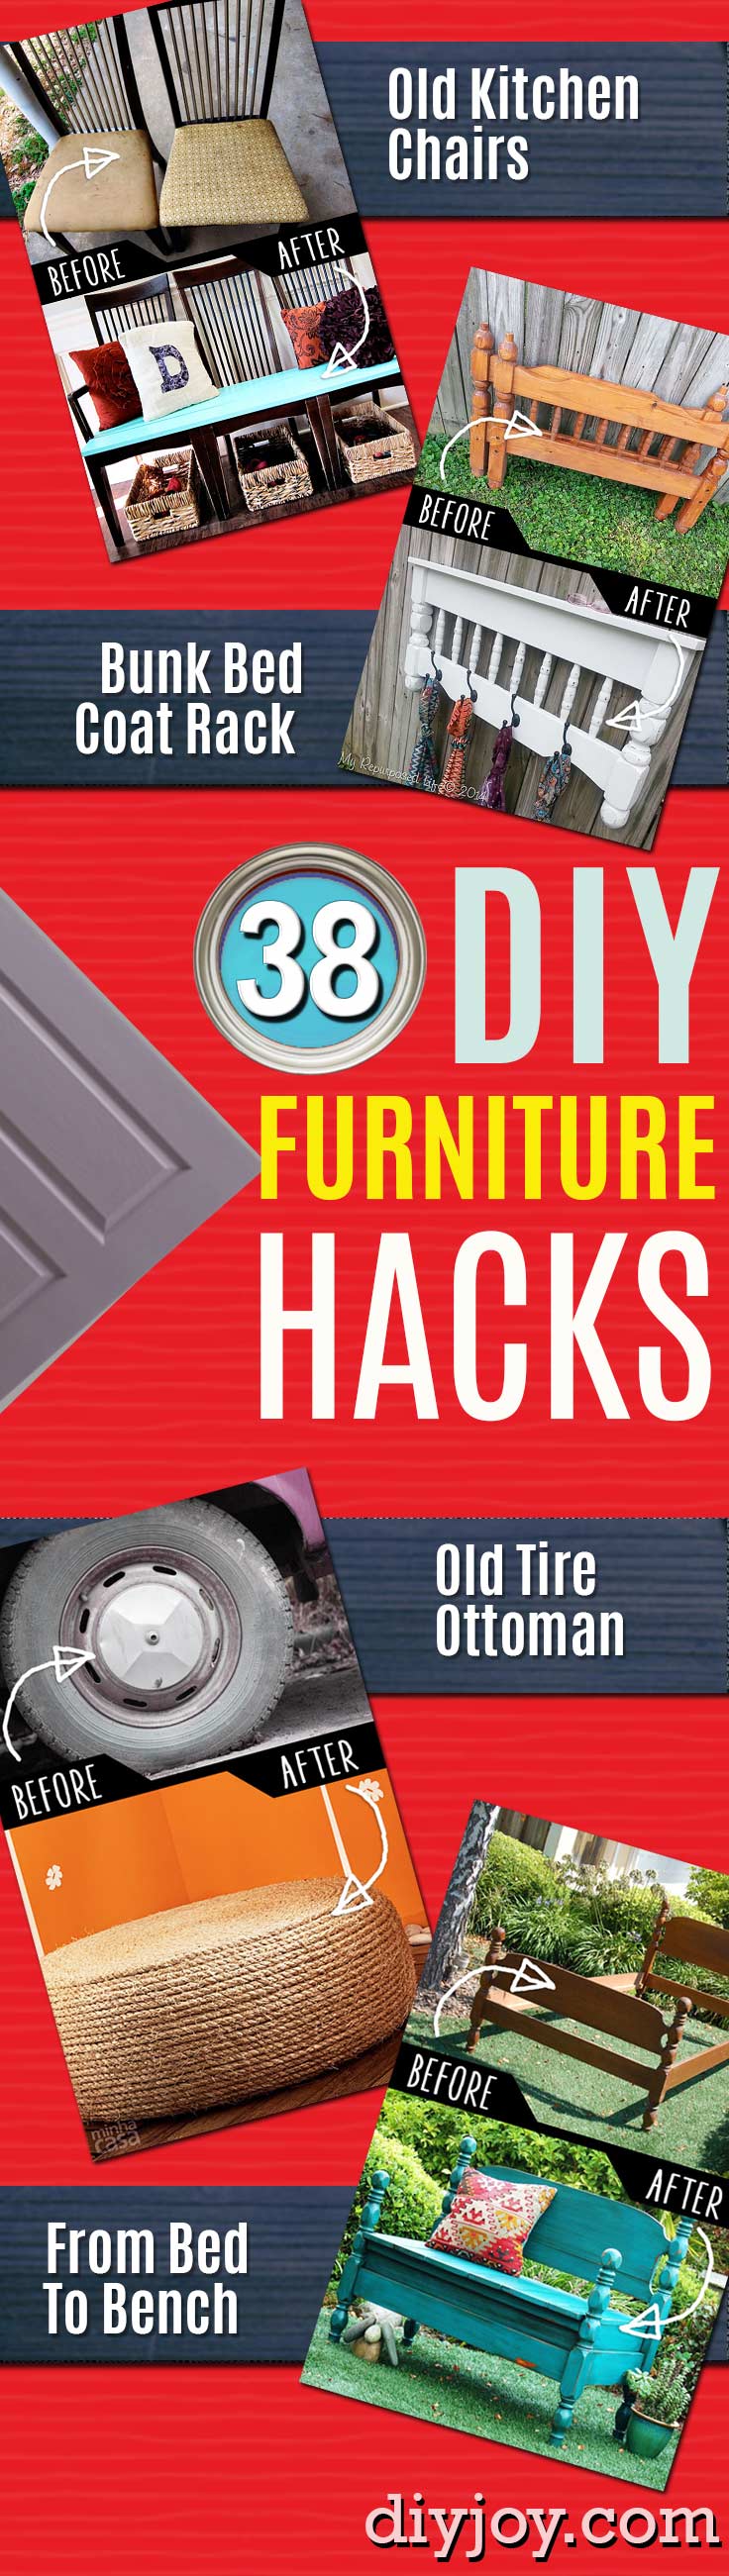 DIY Furniture Hacks and Cool Ideas for Repurposing Stuff for Home Decor. IKEA hacks and ideas for creative decorating. - Easy Hacks for Transforming Old Furniture on The Cheap - Quick Ideas for Creative Home Decor